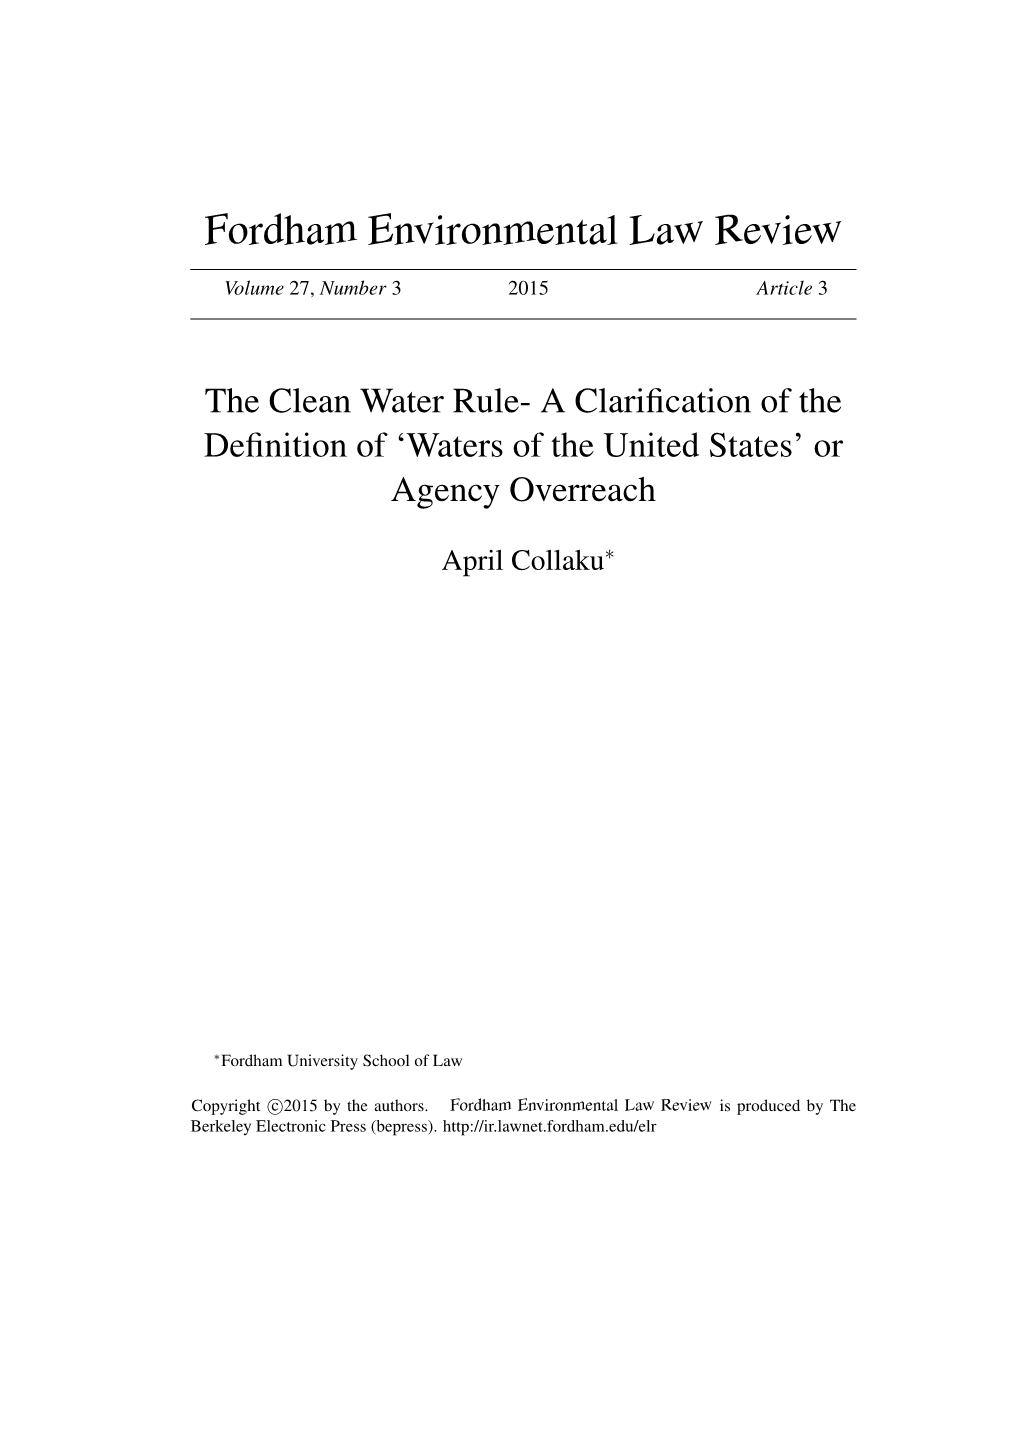 The Clean Water Rule- a Clarification of the Definition Of